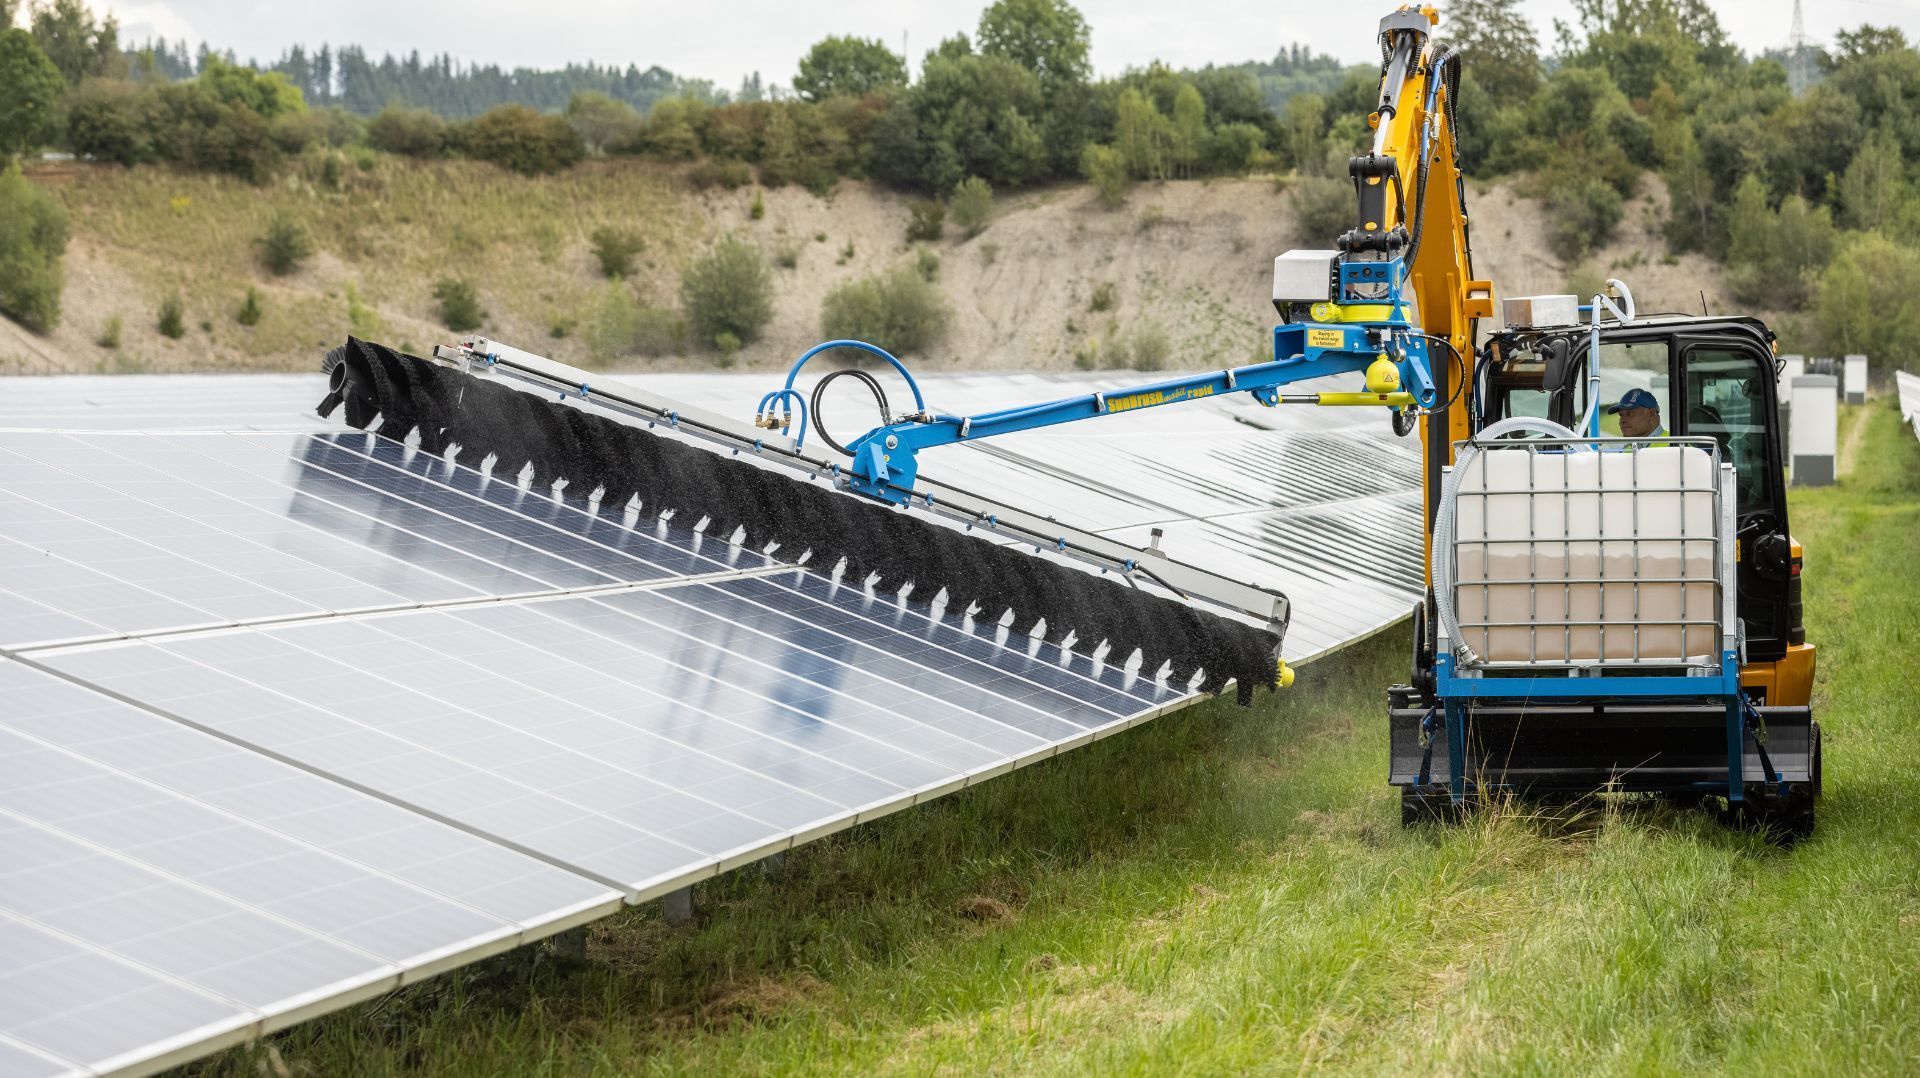 a blue and yellow excavator is cleaning solar panels in a field .